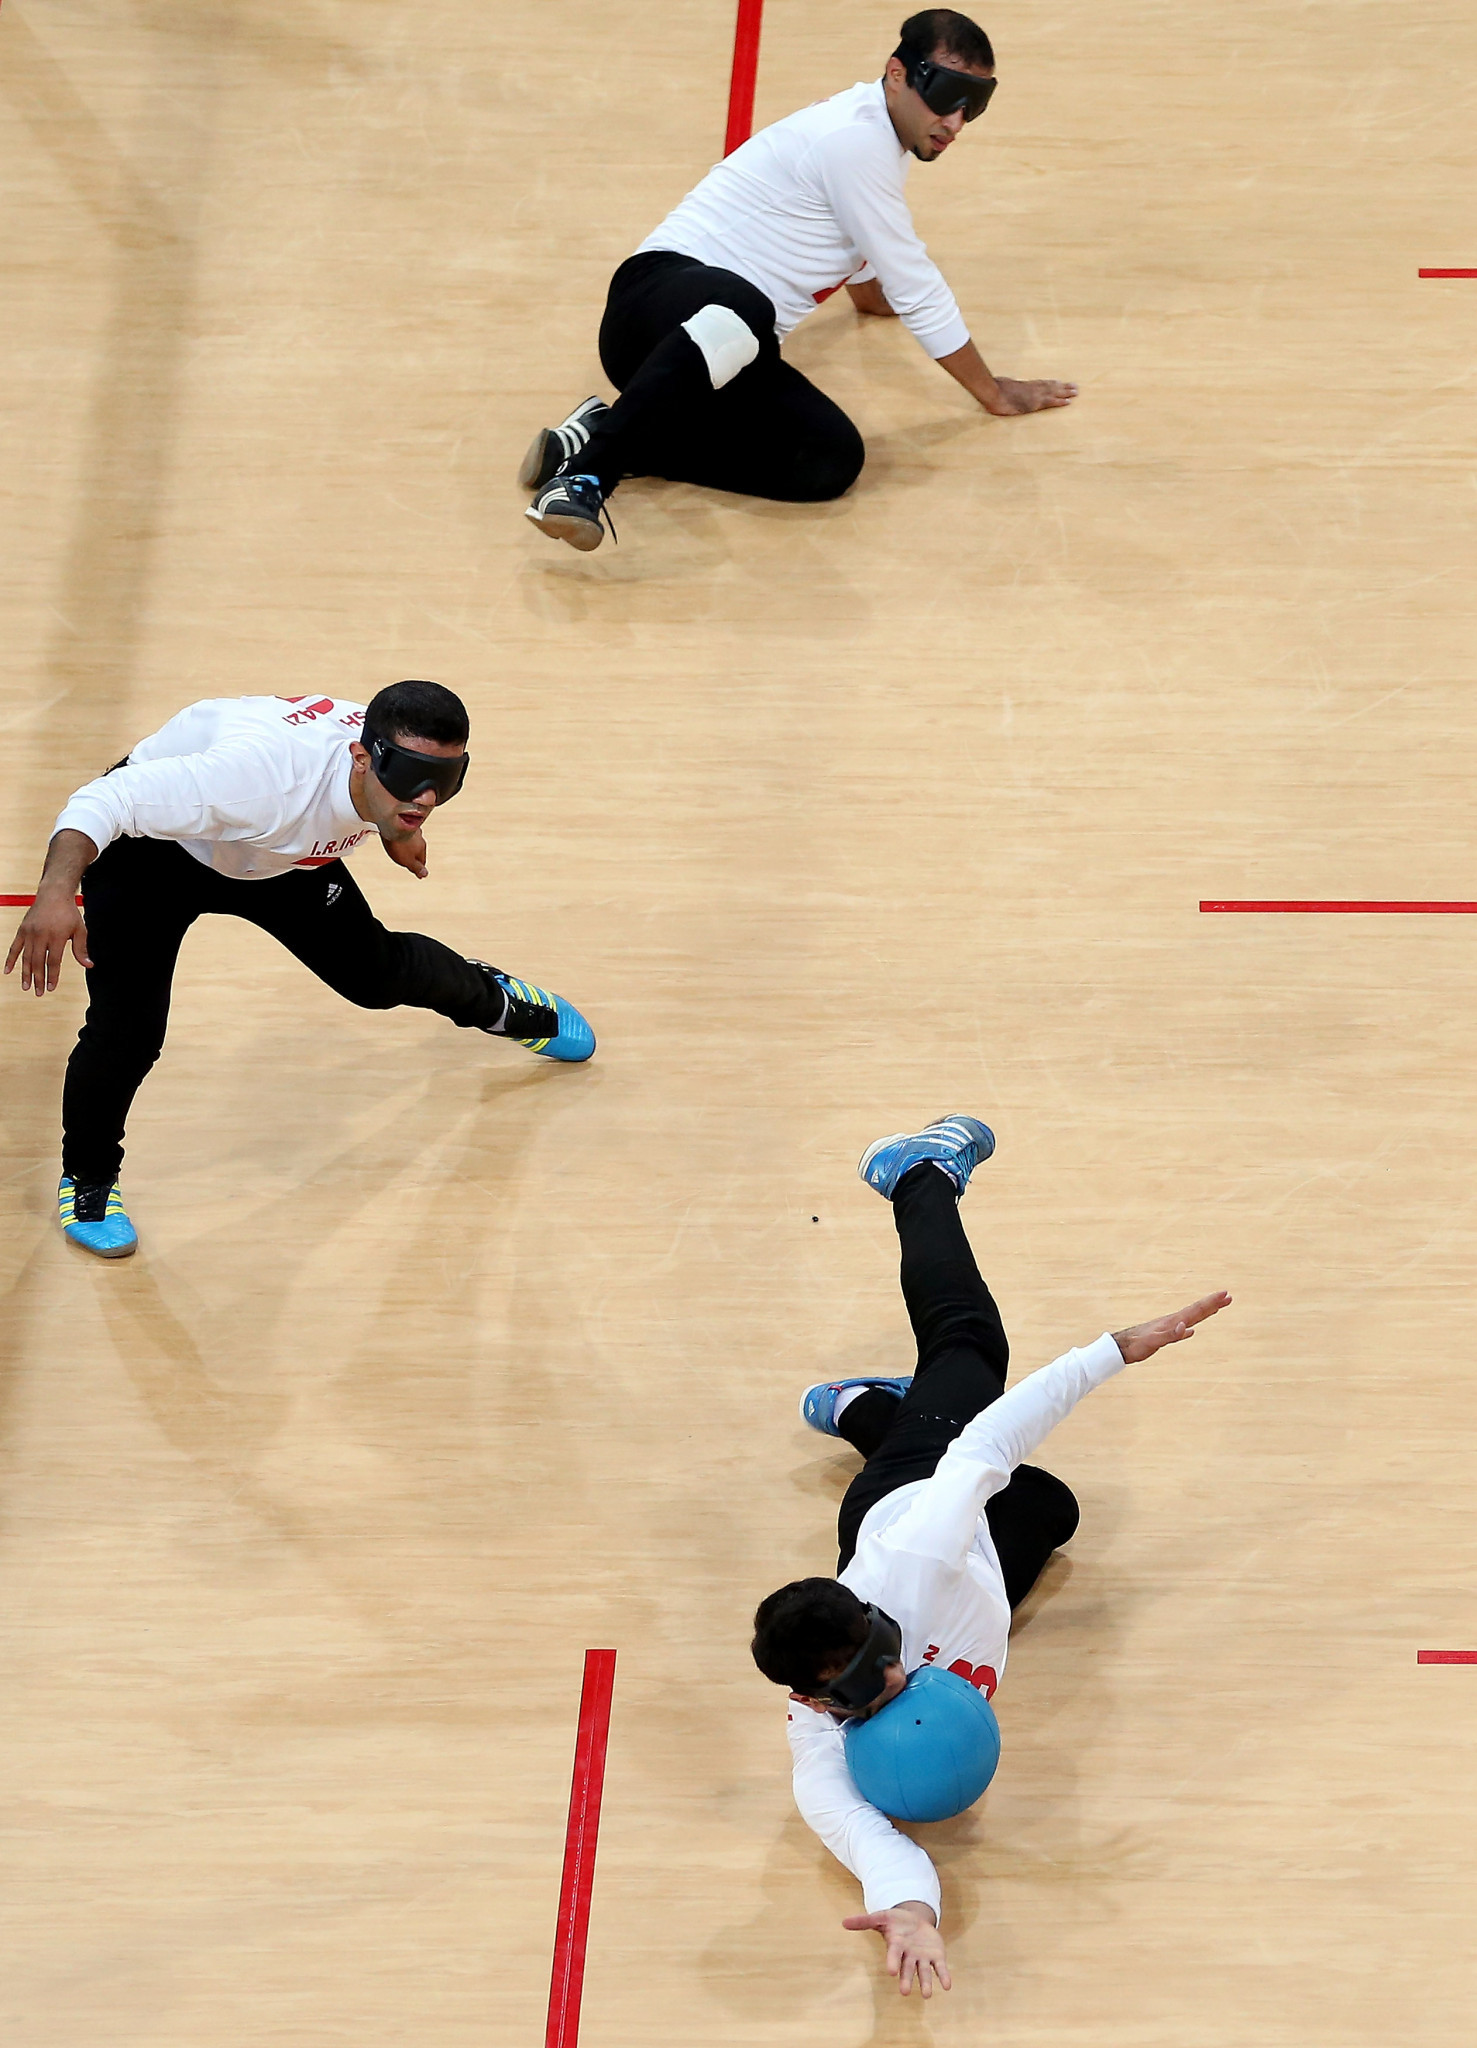 IBSA is hoping to grow goalball among African nations ©Getty Images